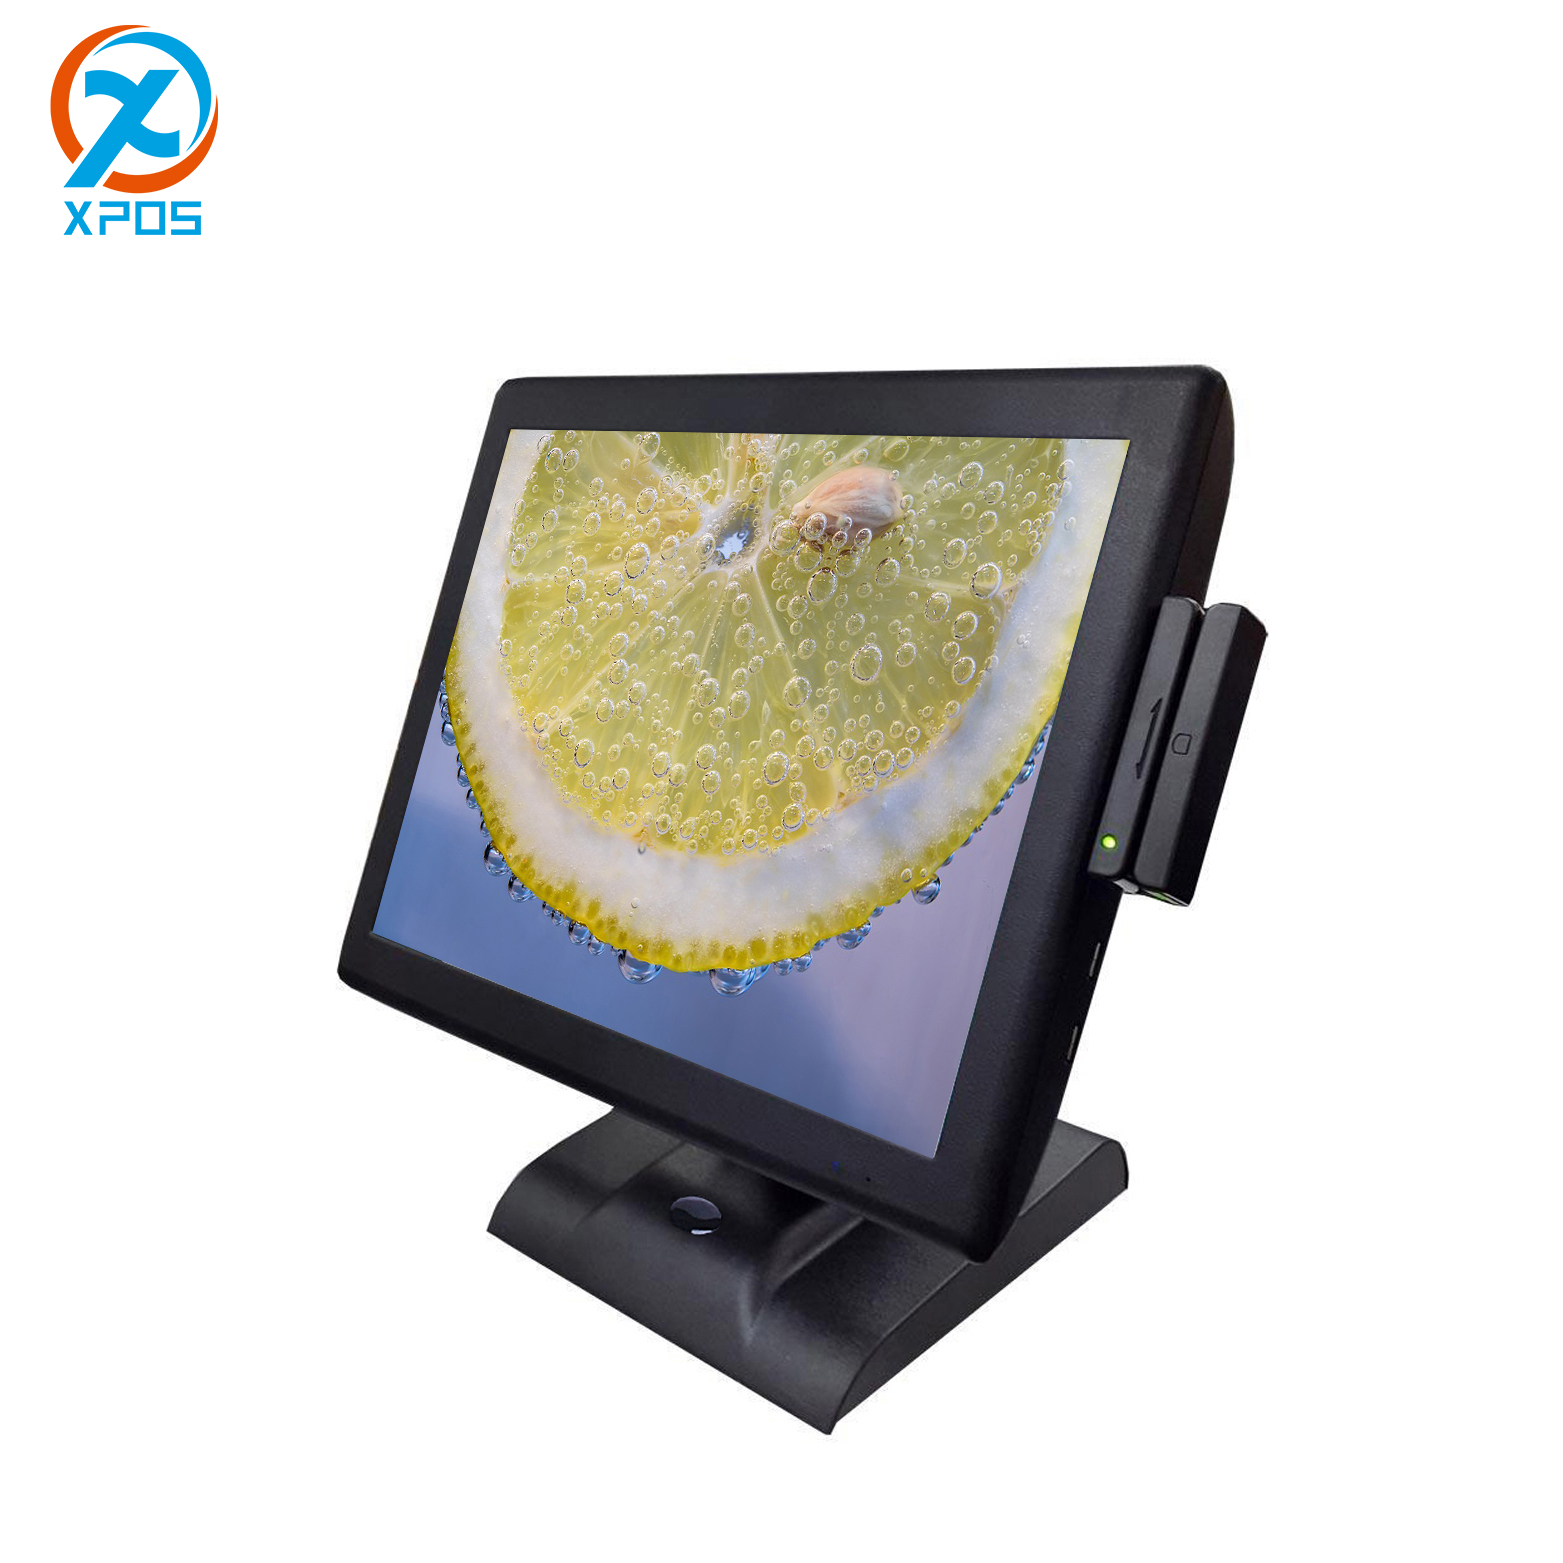 POST6 Touch screen pos system 